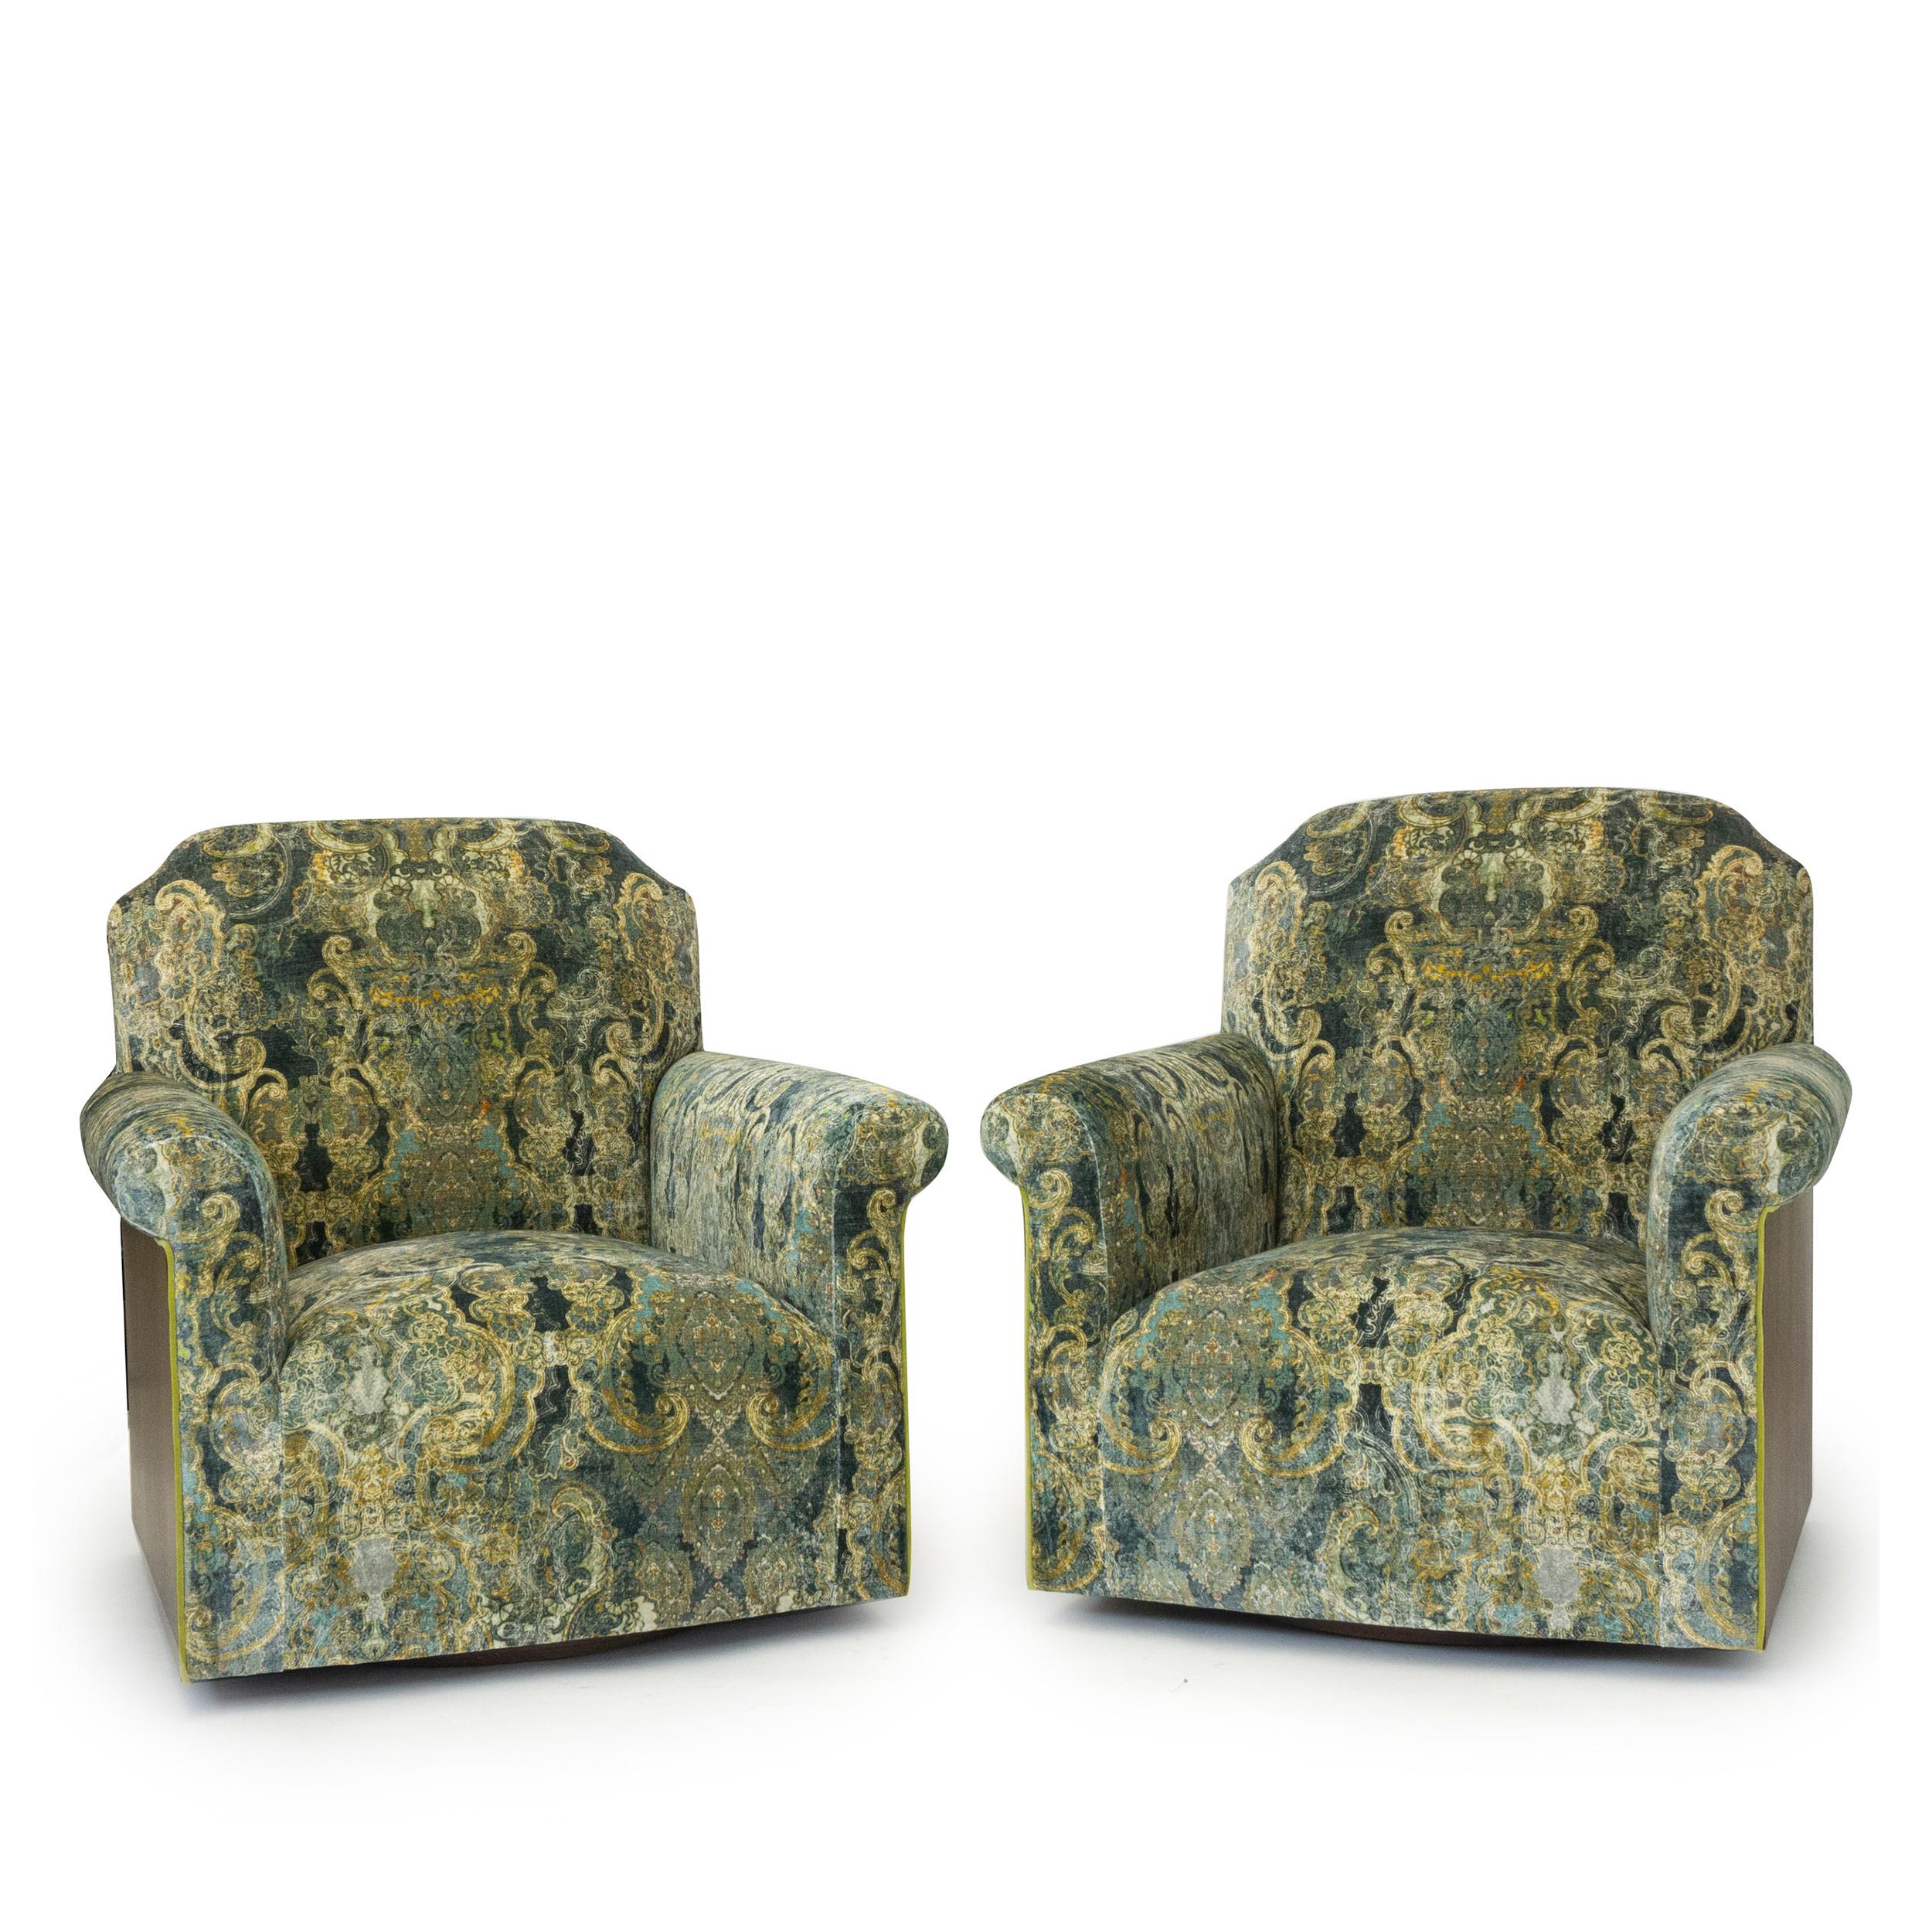 Contemporary Transitional Swivel Chair in Velvet Damask and Walnut Veneer For Sale